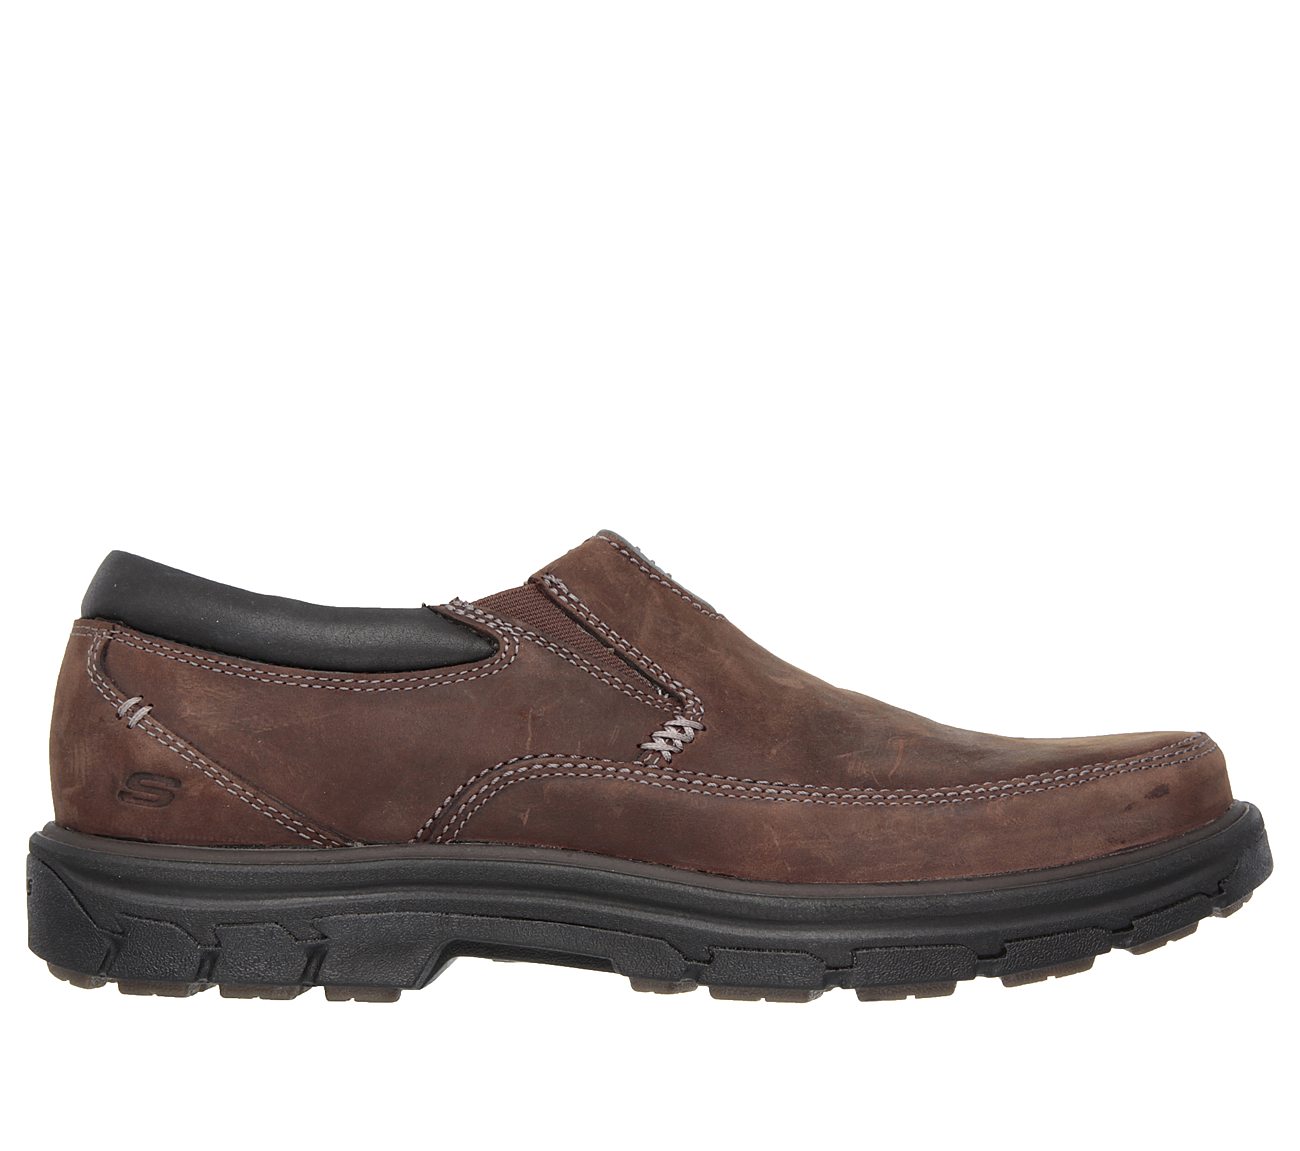 skechers relaxed fit the search slip-on